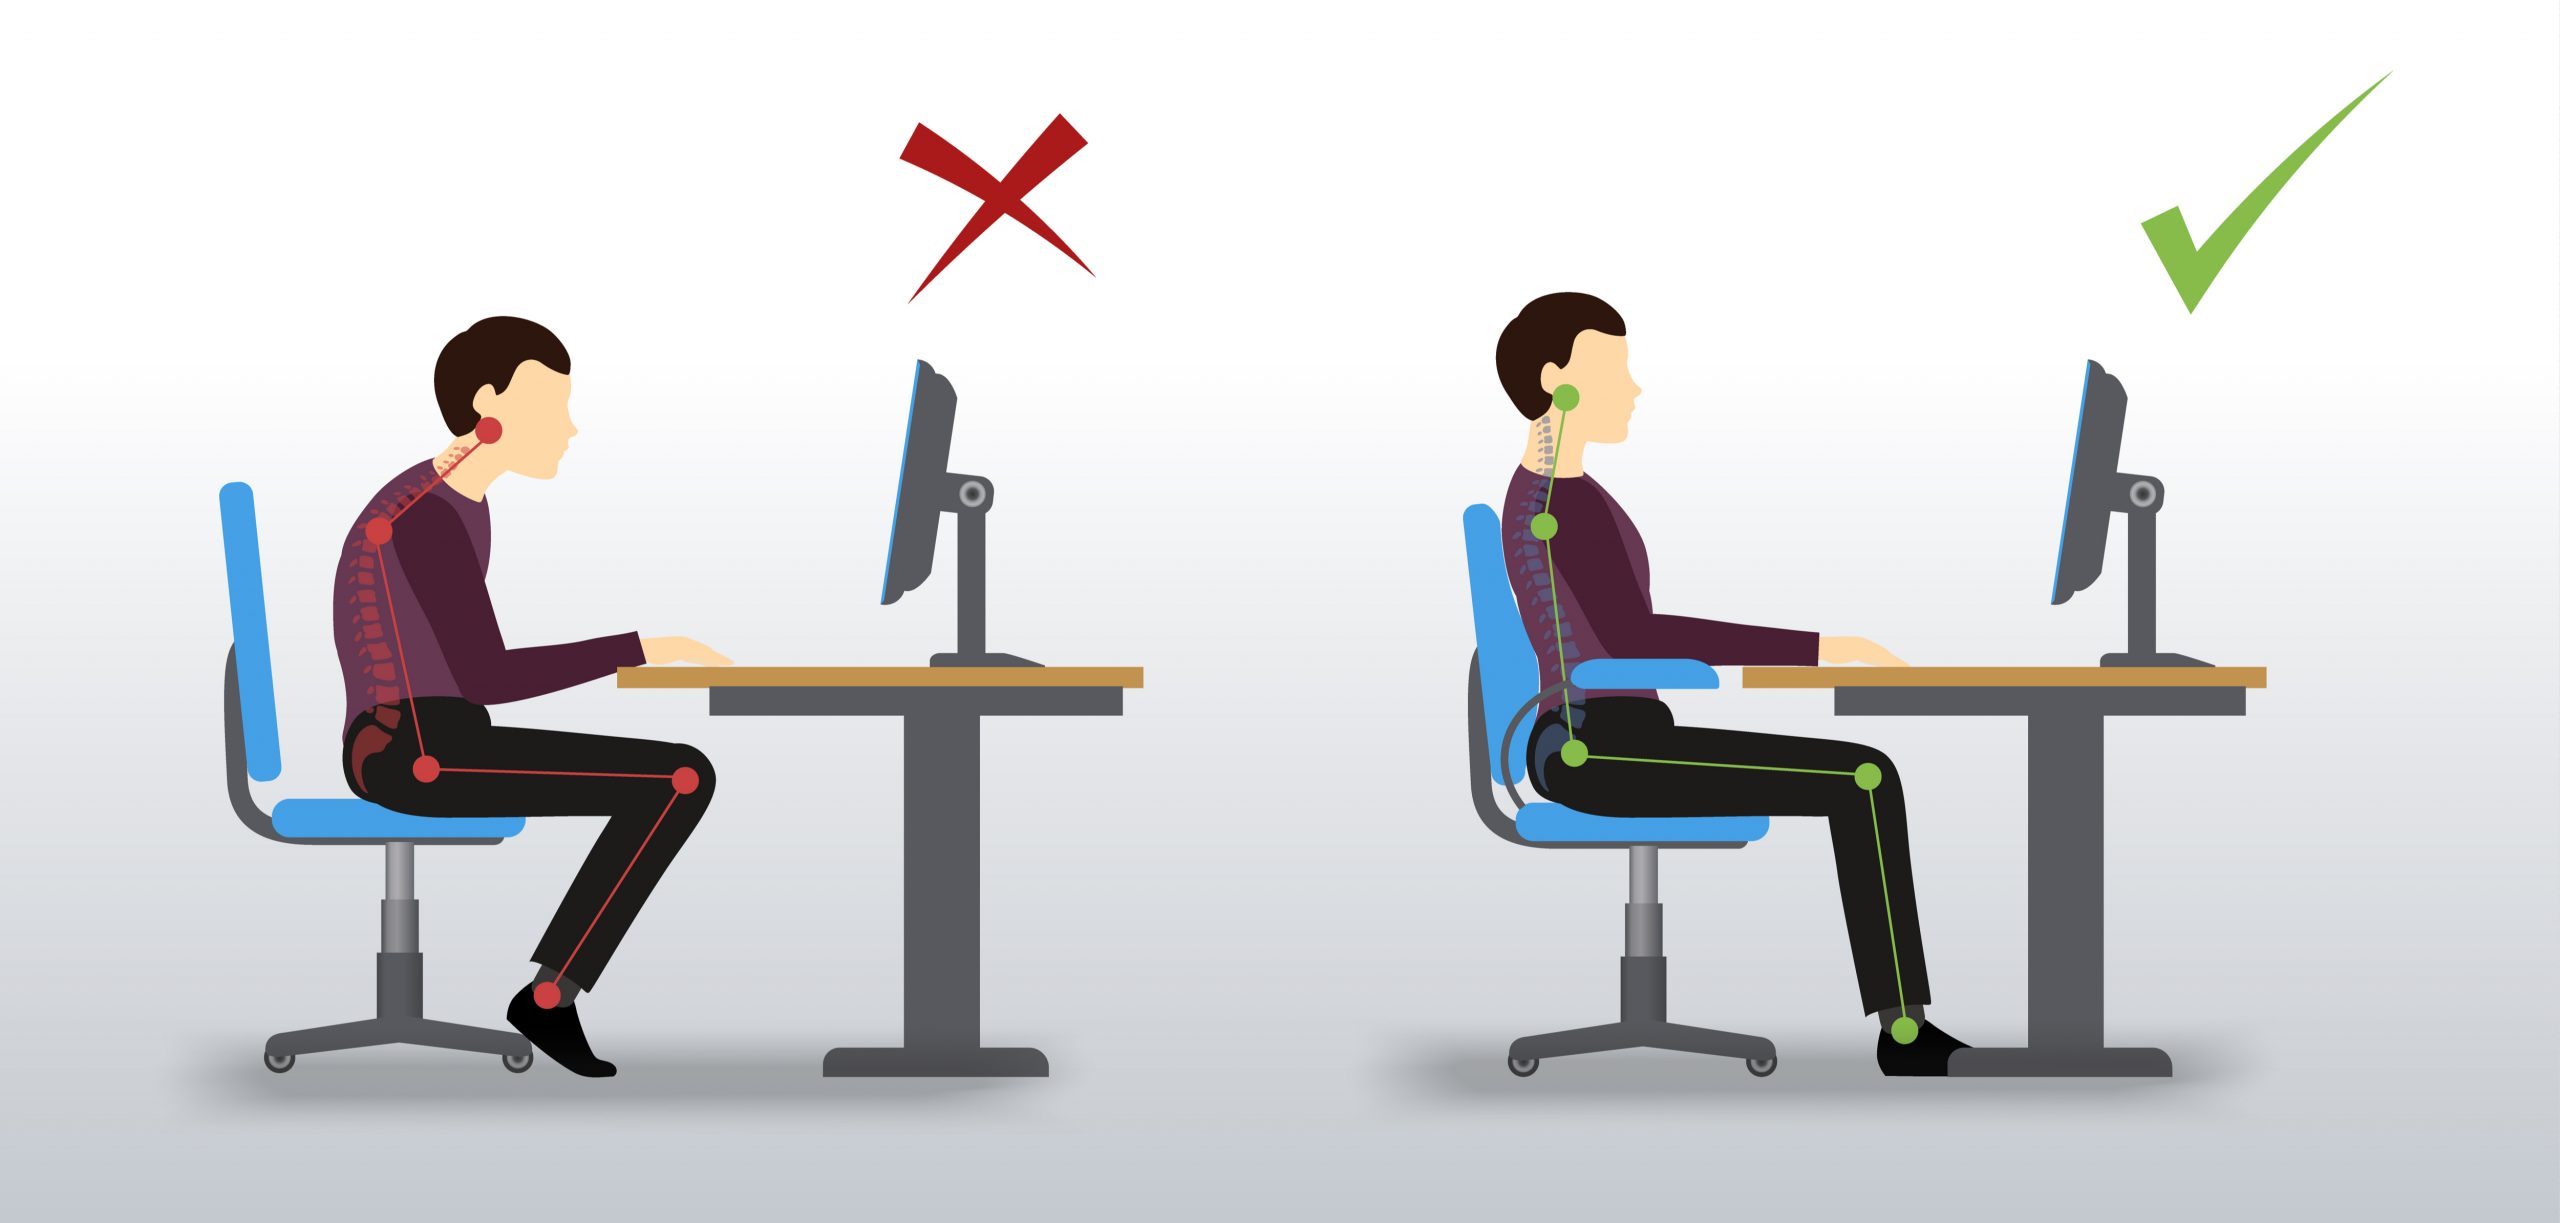 Ergonomics in the Workplace: The Science Behind Ergonomic Office